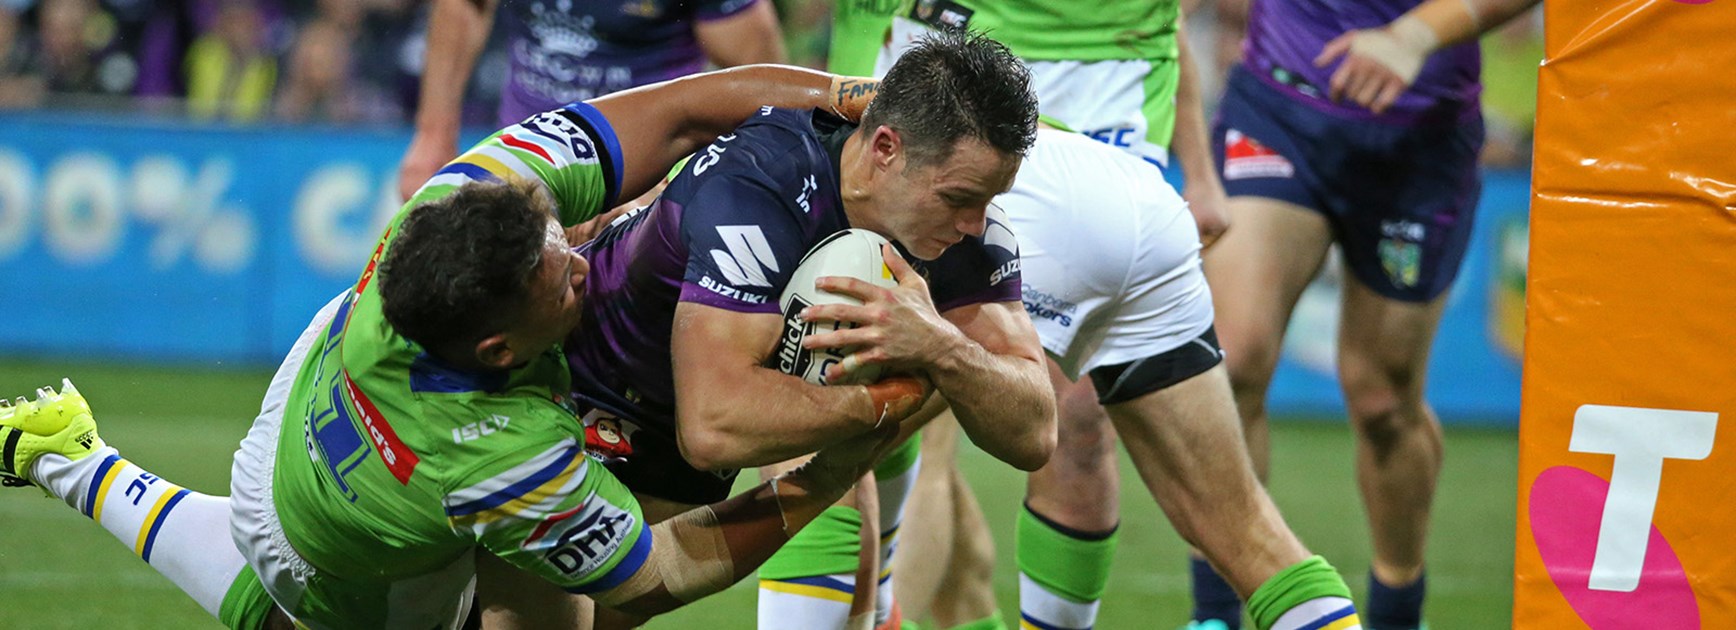 Cooper Cronk on his way to the tryline in his 300th game.